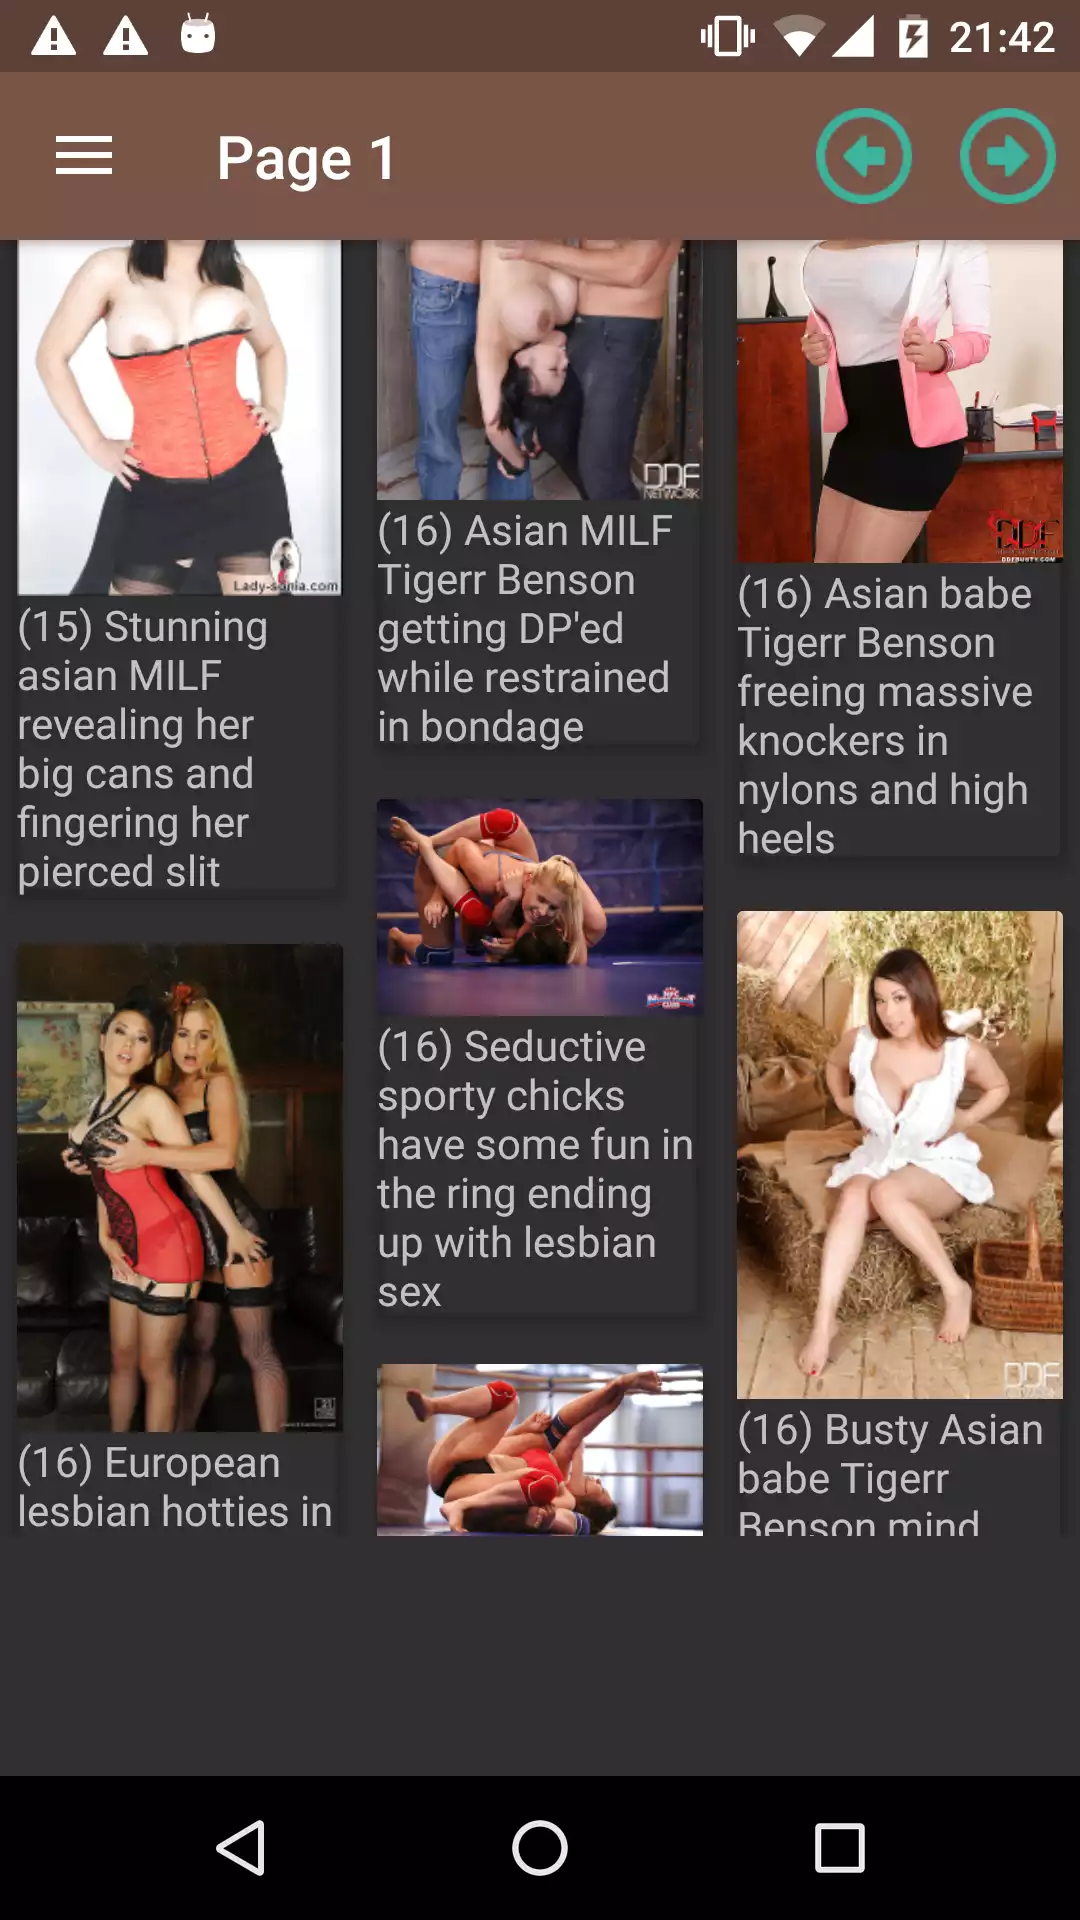 Tigerr Benson best,apk,sexy,apps,hintai,photos,android,phone,porn,pics,picd,gallery,hentai,hot